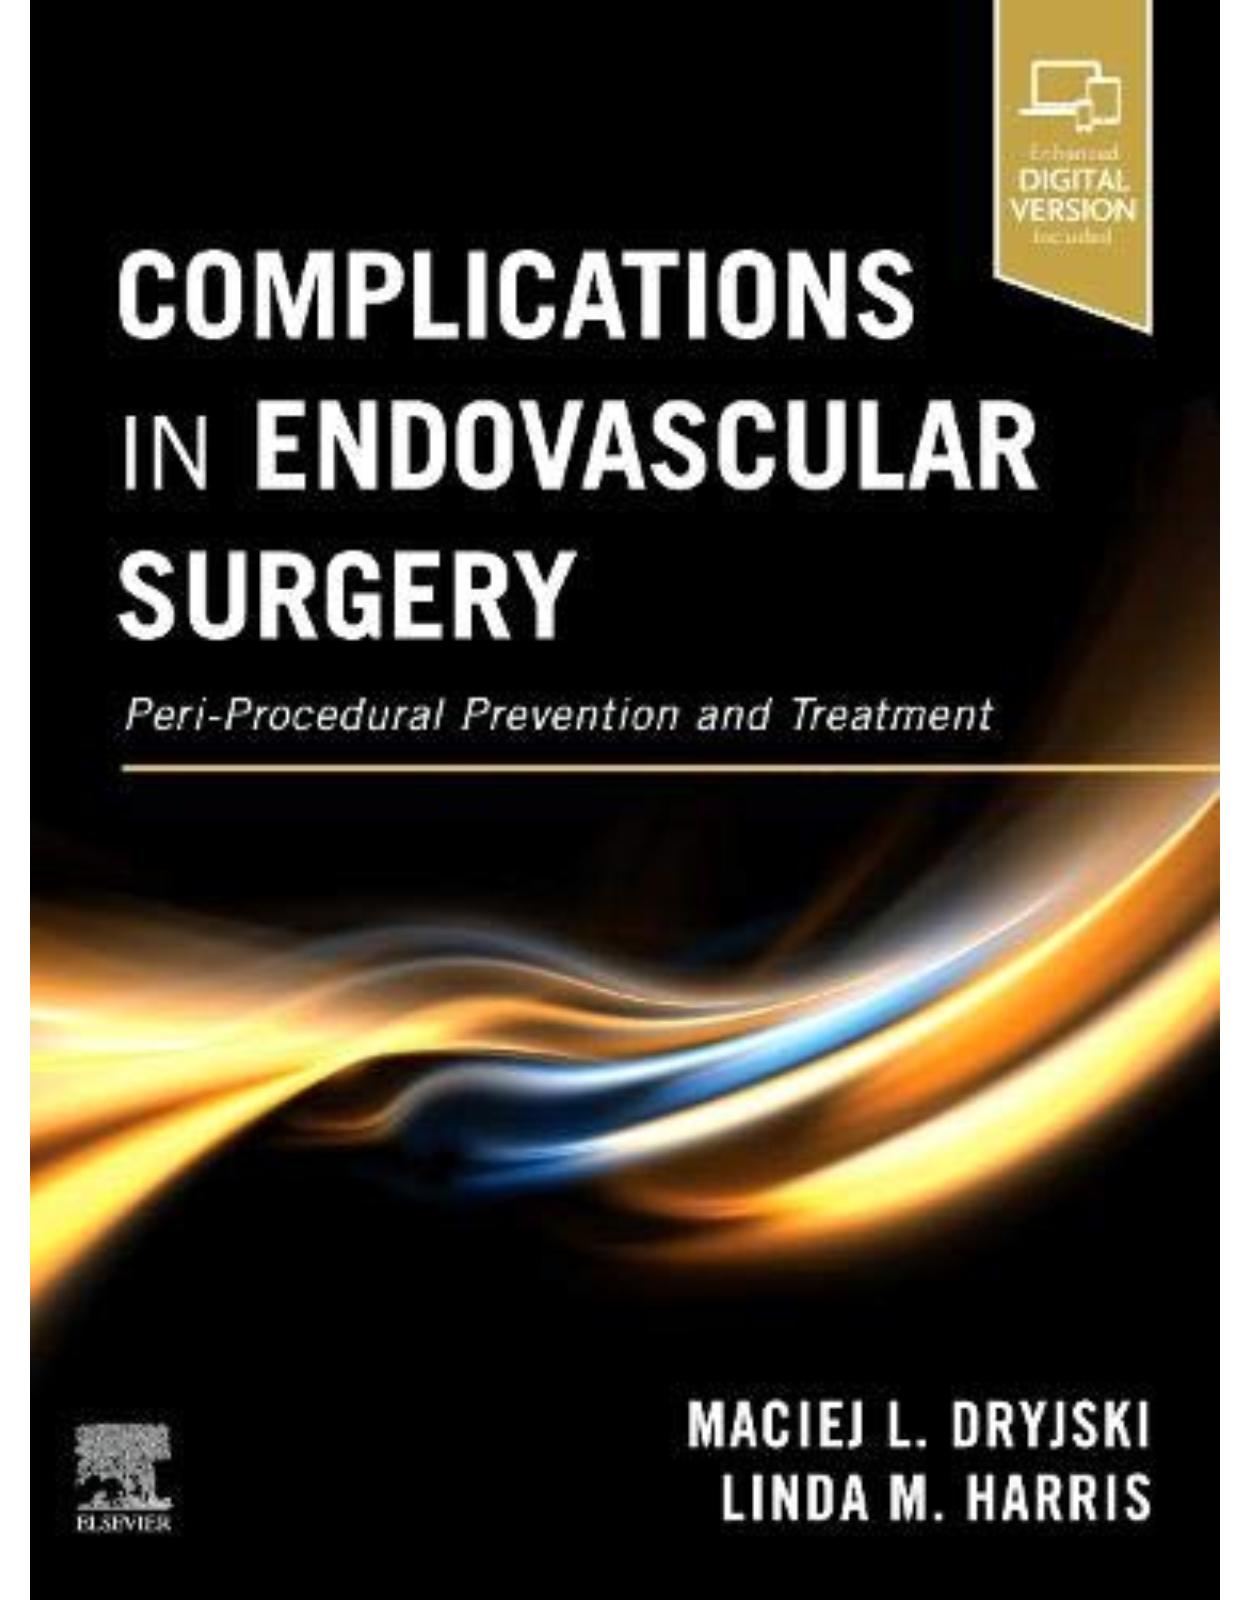 Complications in Endovascular Surgery